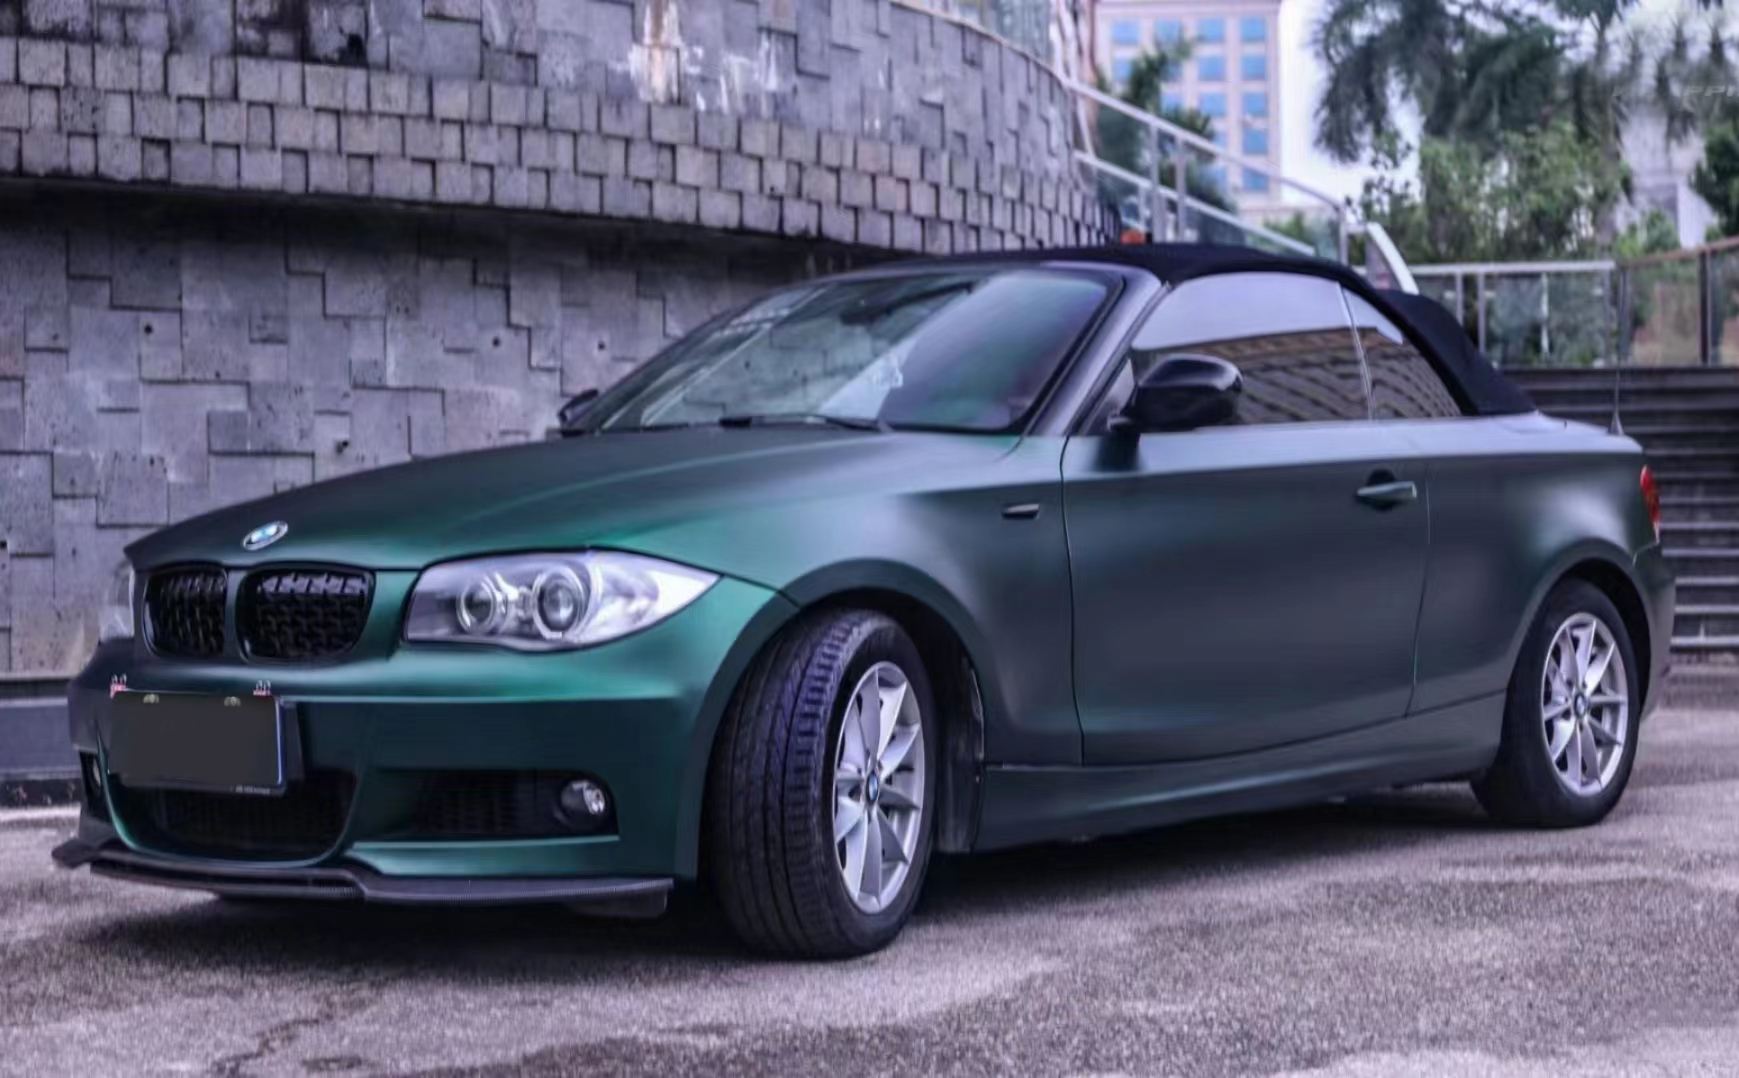 BMW 2 Series Wrap`s Introduction